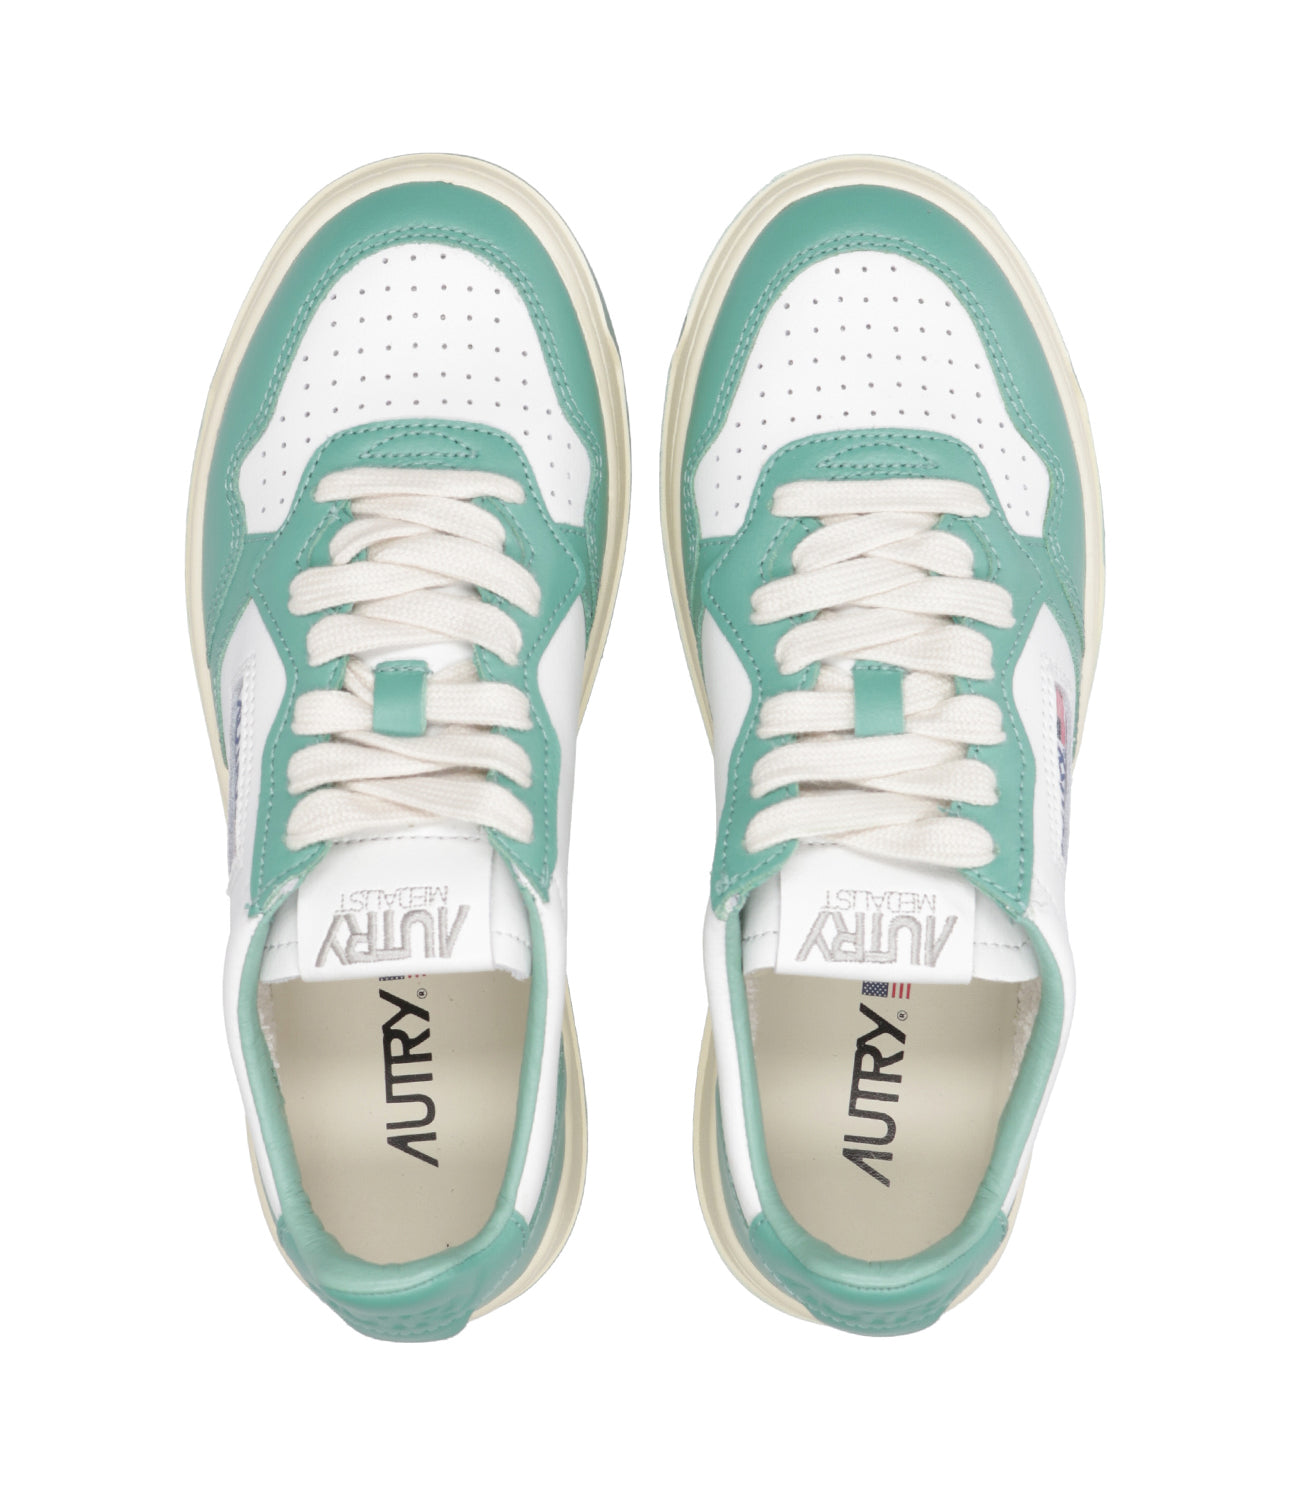 Autry | Medalist Low White and Teal Sneakers